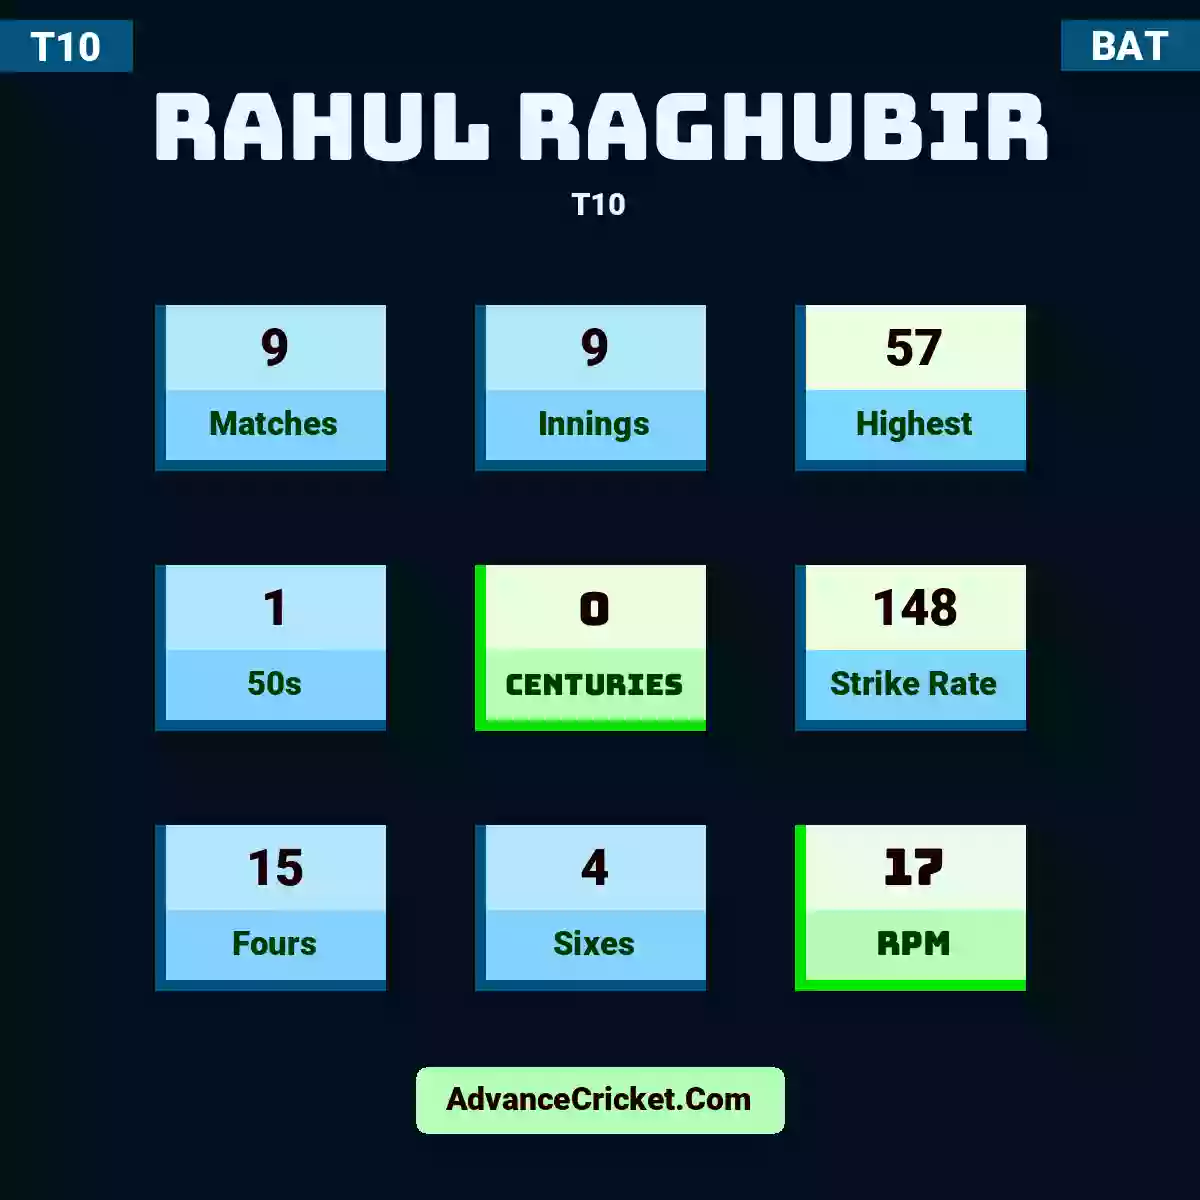 Rahul Raghubir T10 , Rahul Raghubir played 9 matches, scored 57 runs as highest, 1 half-centuries, and 0 centuries, with a strike rate of 148. R.Raghubir hit 15 fours and 4 sixes, with an RPM of 17.